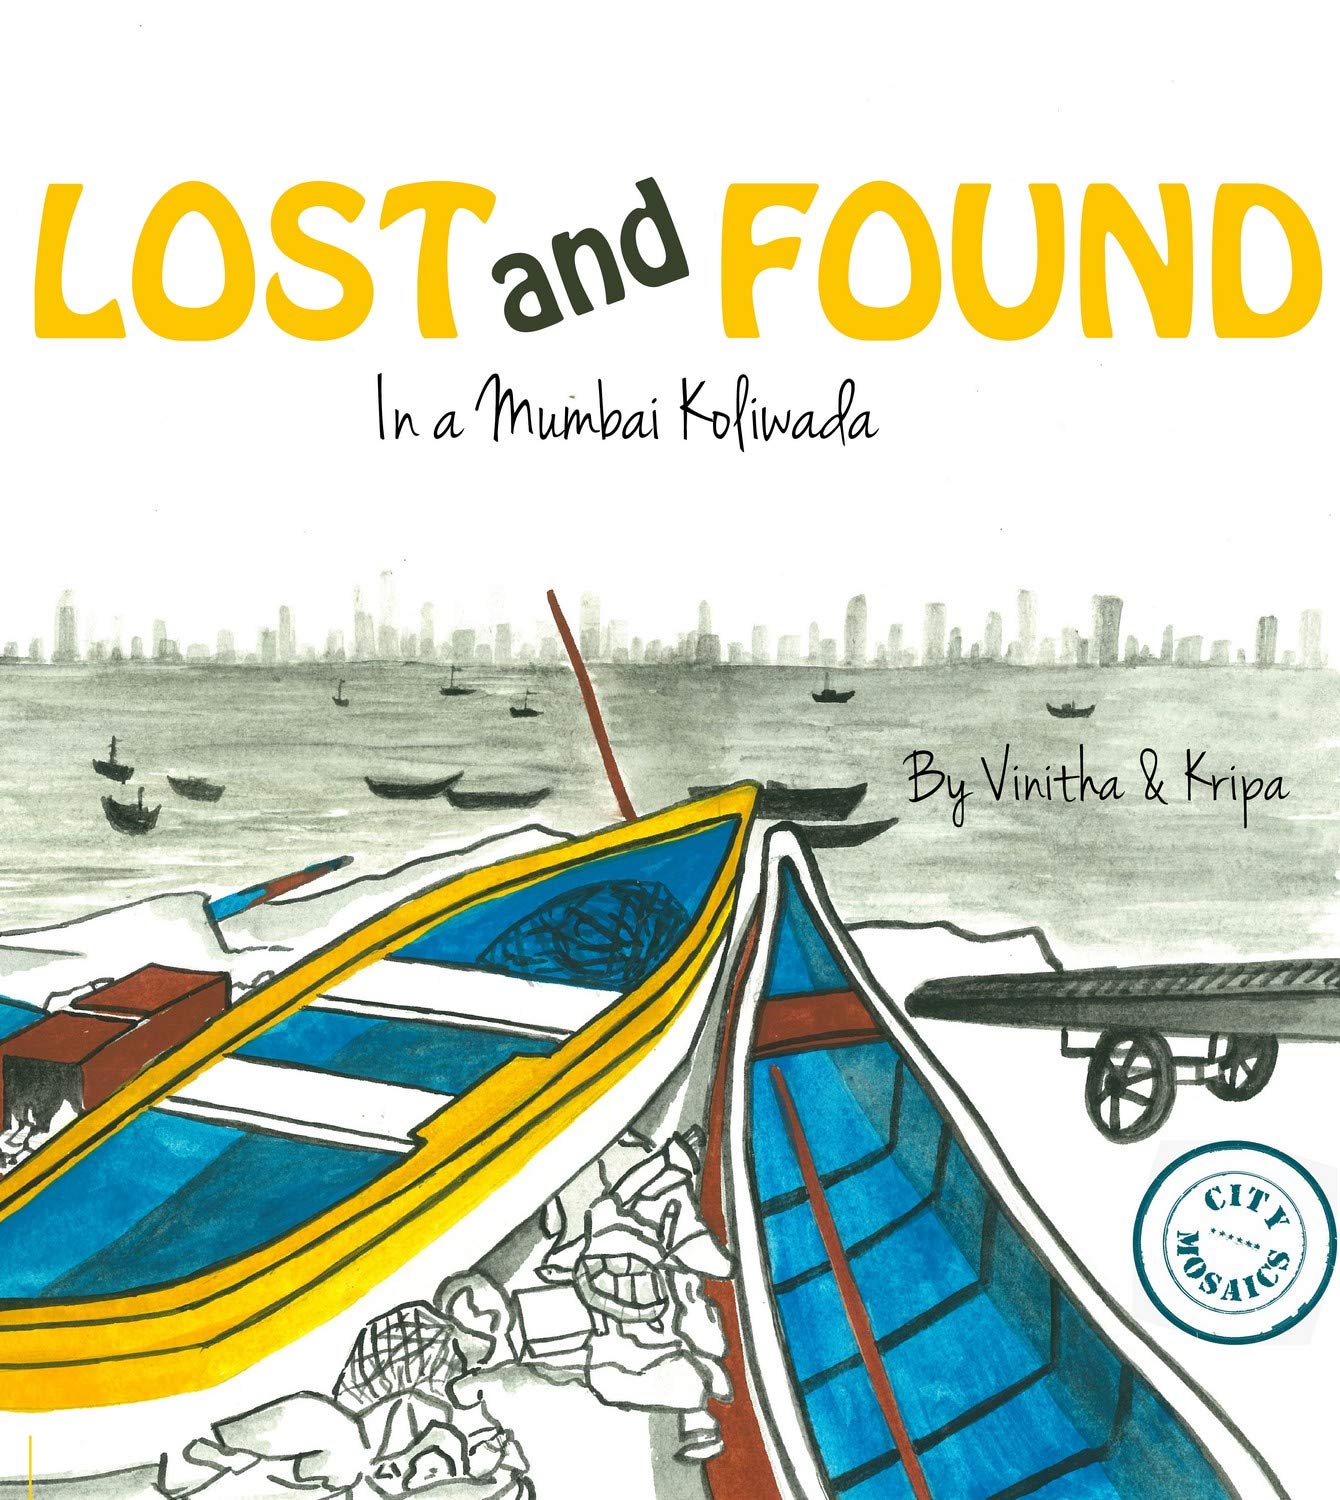 You are currently viewing Lost and Found in a Mumbai Koliwada by Vinitha and Kripa